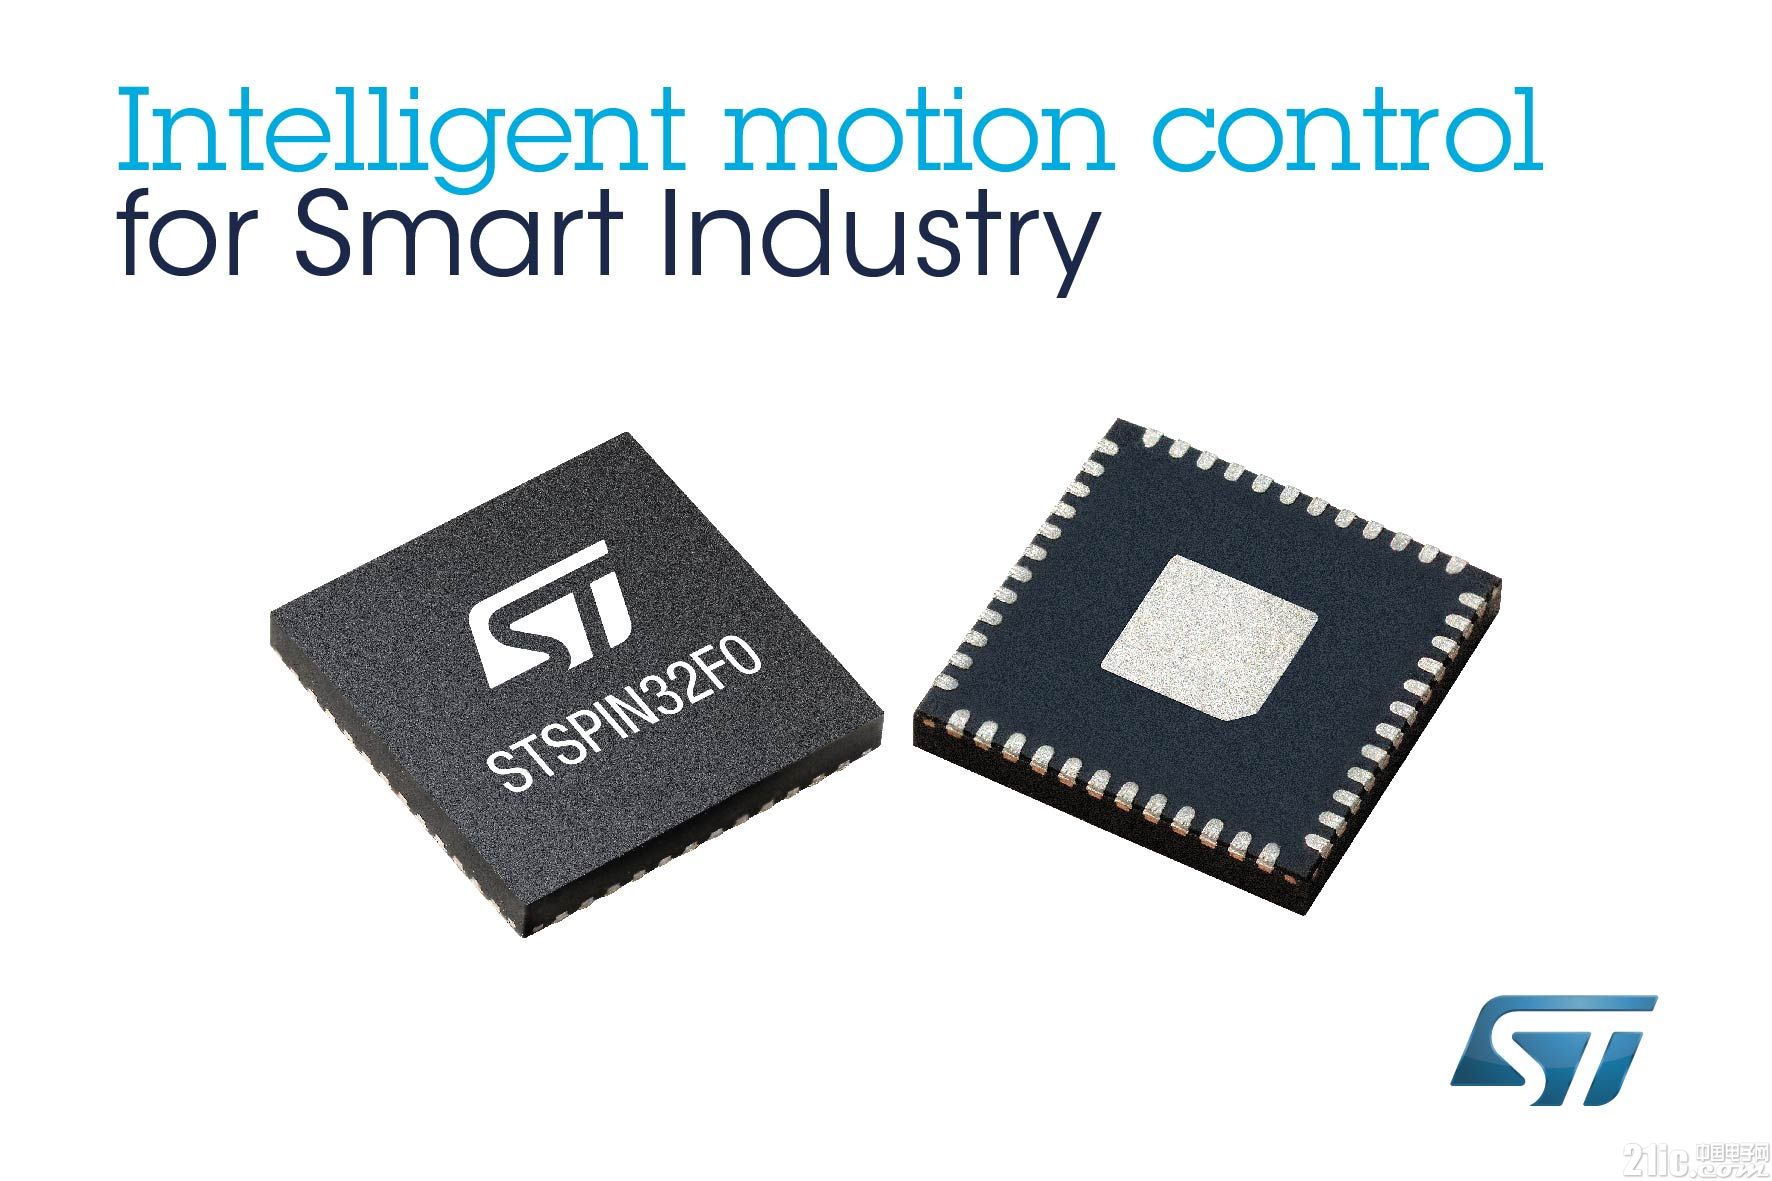 ST News Picture November 7th - STMicroelectronics (ST) launches intelligent motor controller with high performance and simplicity for smart industry and high-end consumer electronics.jpg